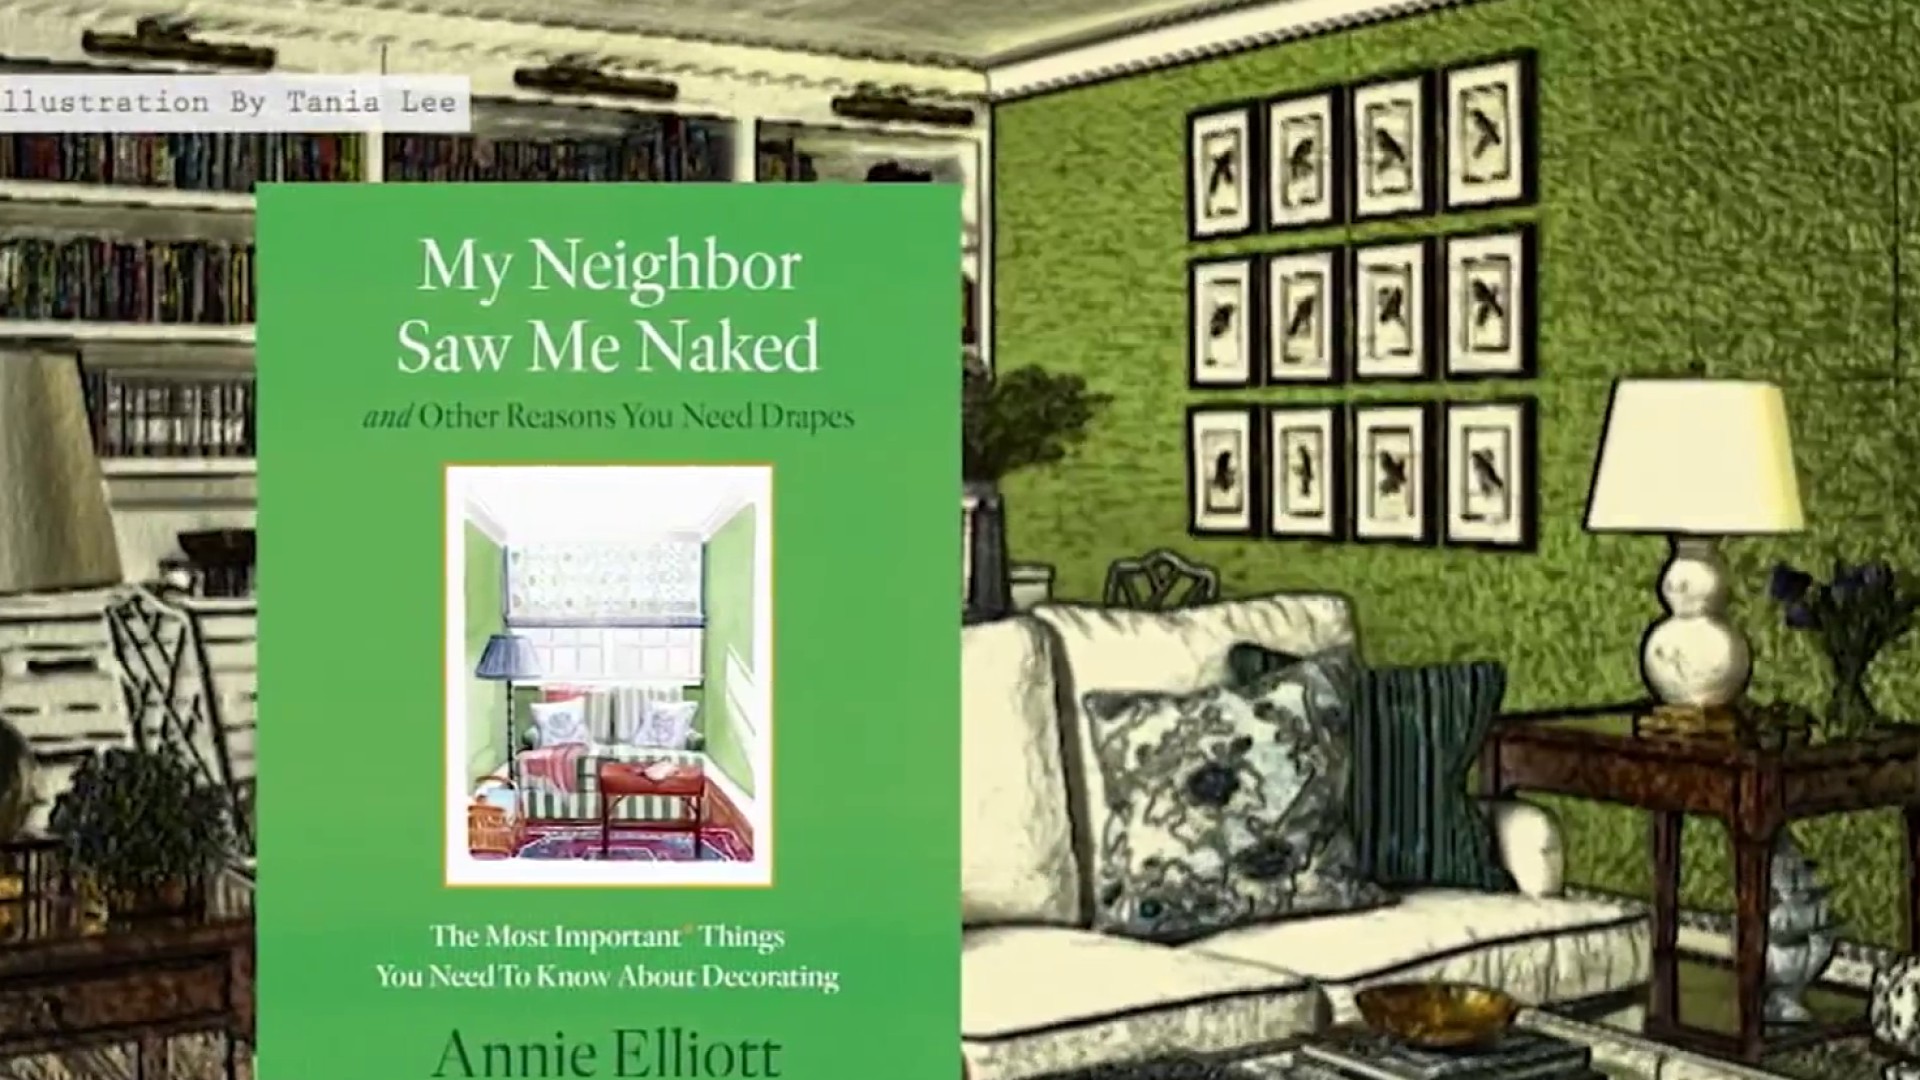 My Neighbor Saw Me Naked Book highlights the importance of drapes image